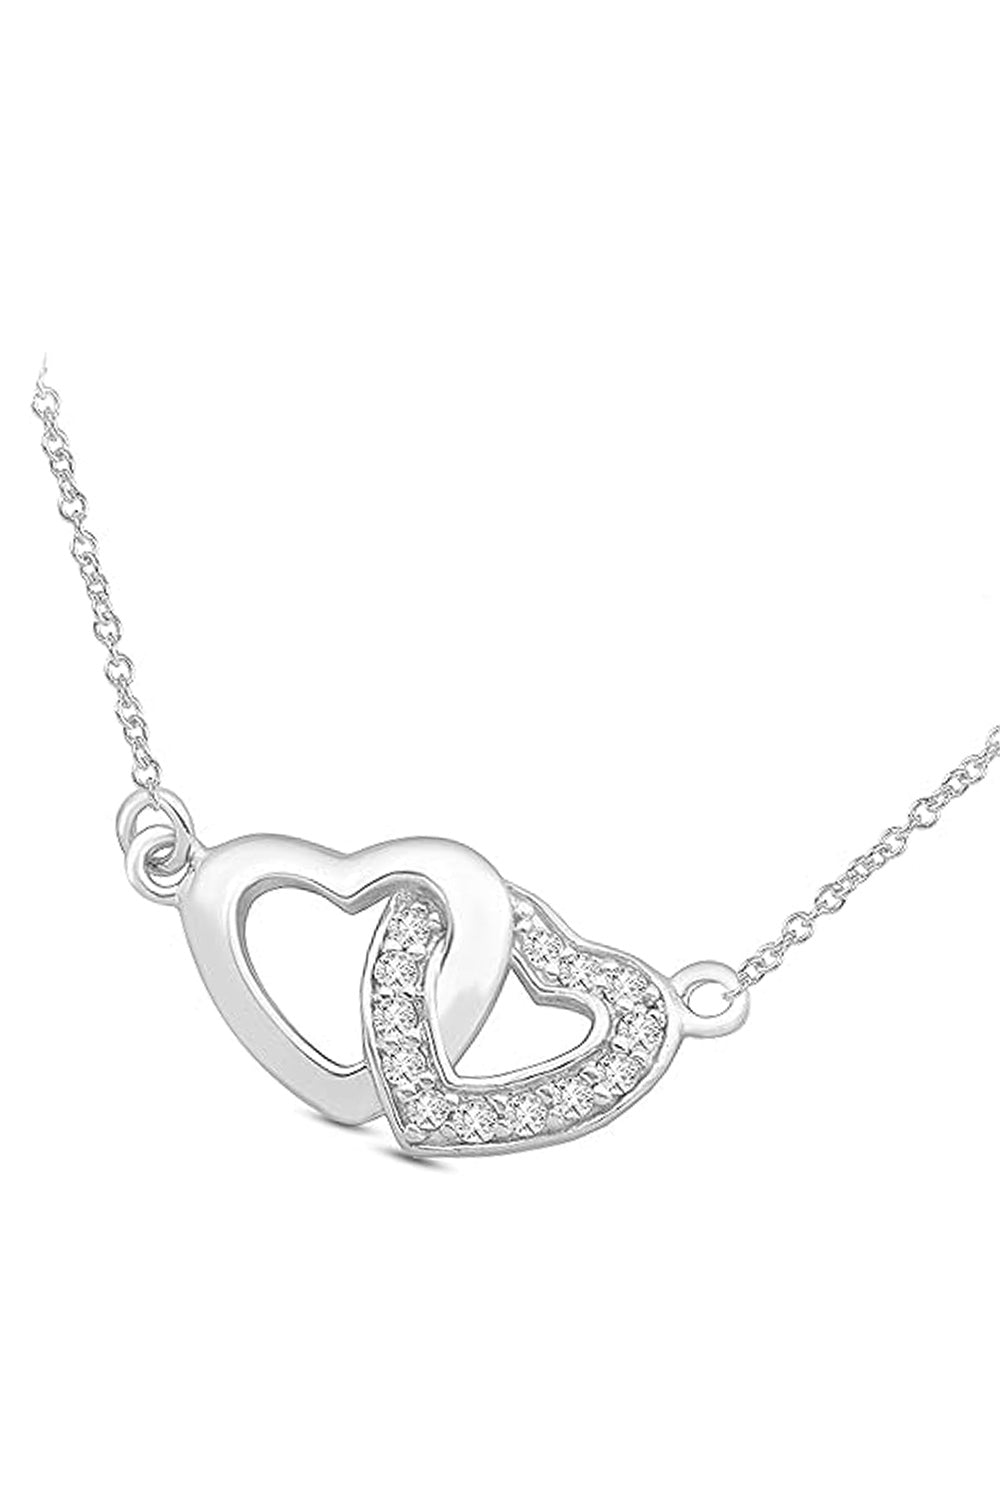 White Gold Color Linked Hearts Pendant Necklace